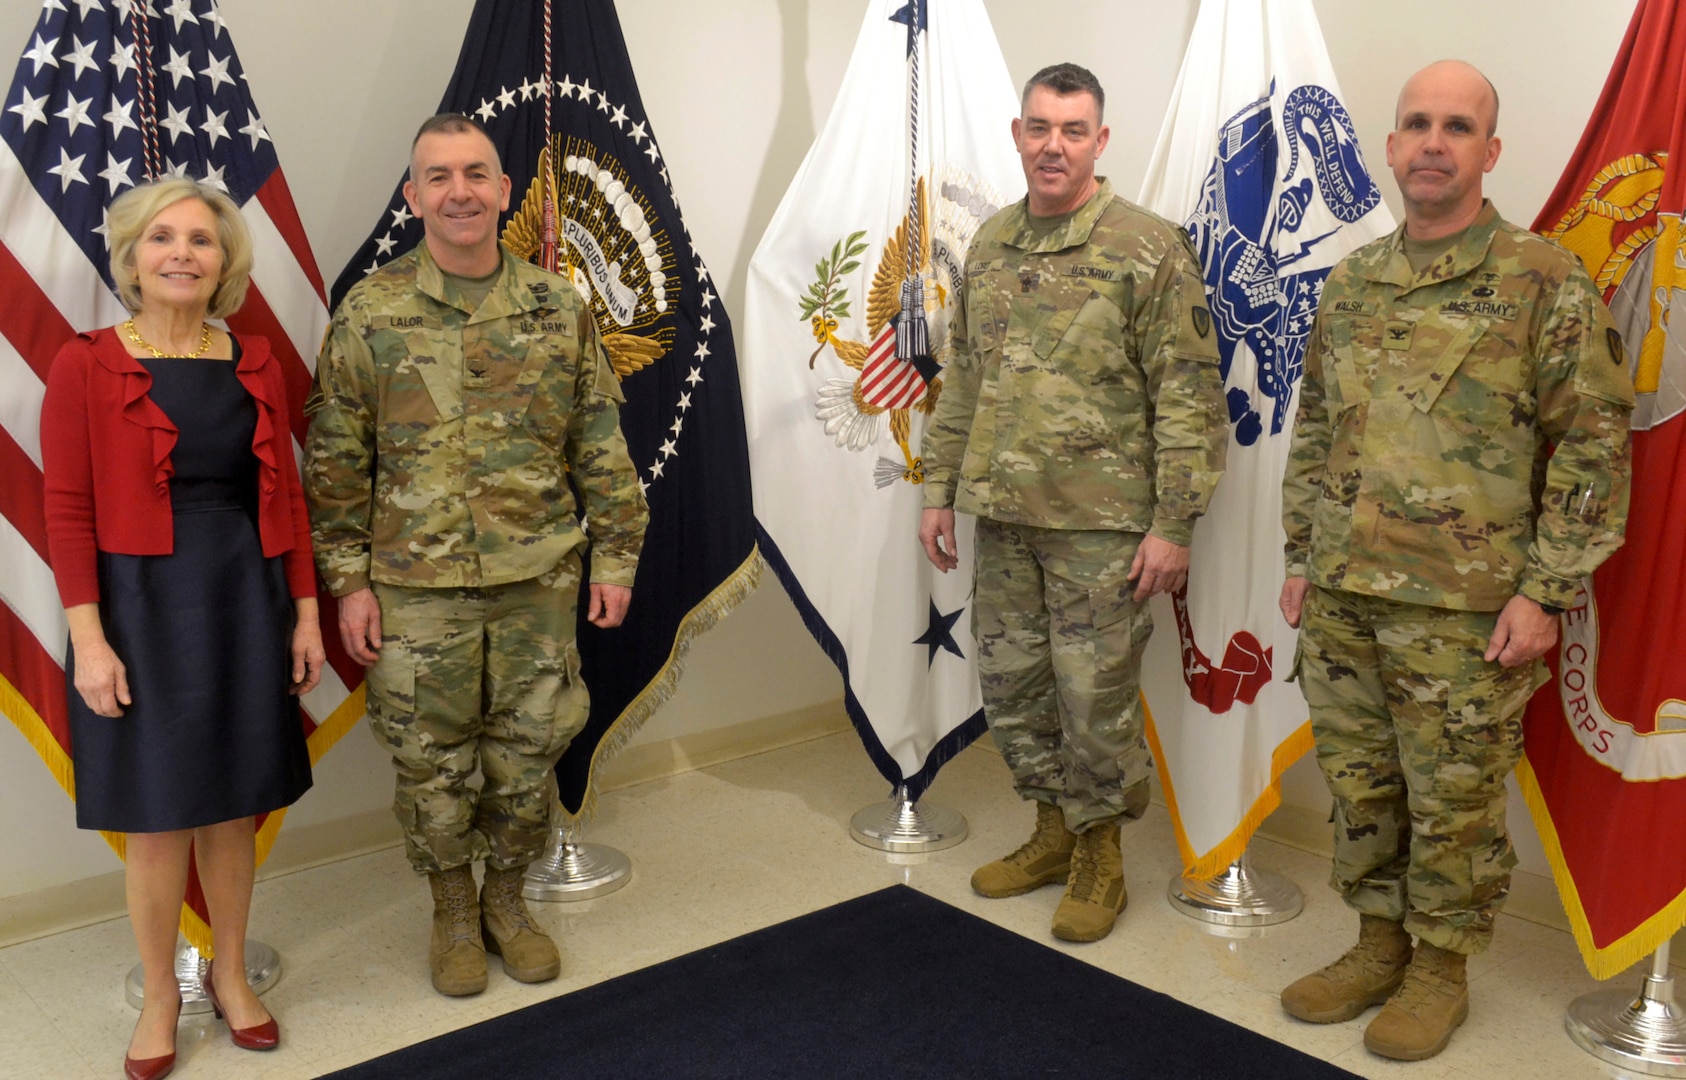 Army Col. Michael Lalor, Army Medical Logistics Command commander, left center, Sgt. Maj. Corey Lord, AMLC sergeant major, right center, and Col. Timothy Walsh, AMLC deputy commander, right, pose for a photo with Linda Farrell, DLA Troop Support Flag Room supervisor, at DLA Troop Support Jan. 7, 2020 in Philadelphia.